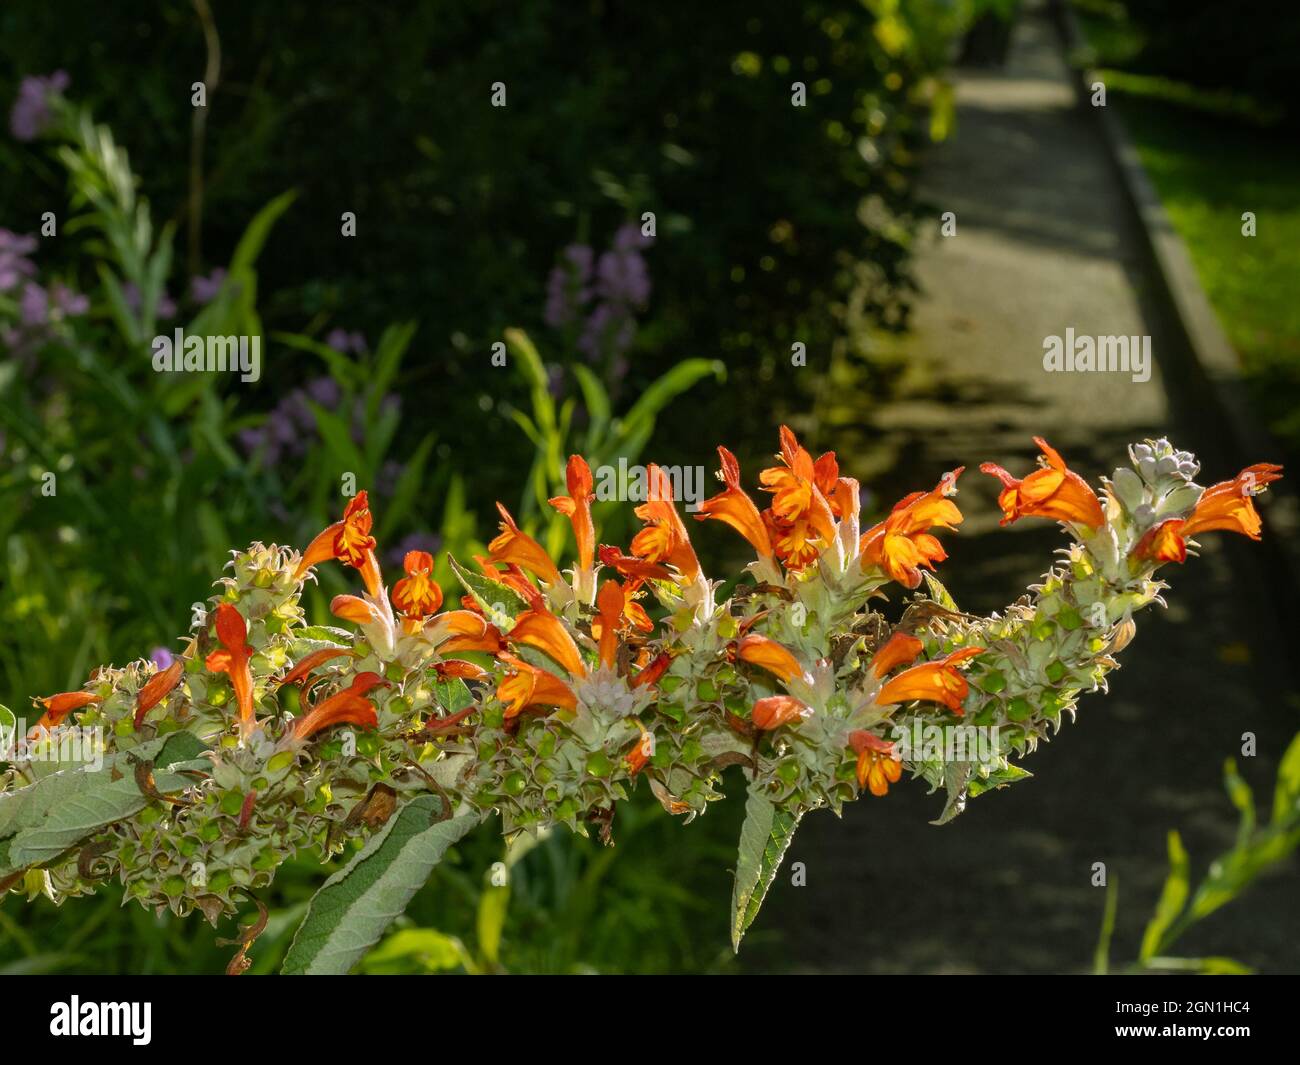 Scenic view of a Colquhounia coccinea flowering plant on a blurred background Stock Photo